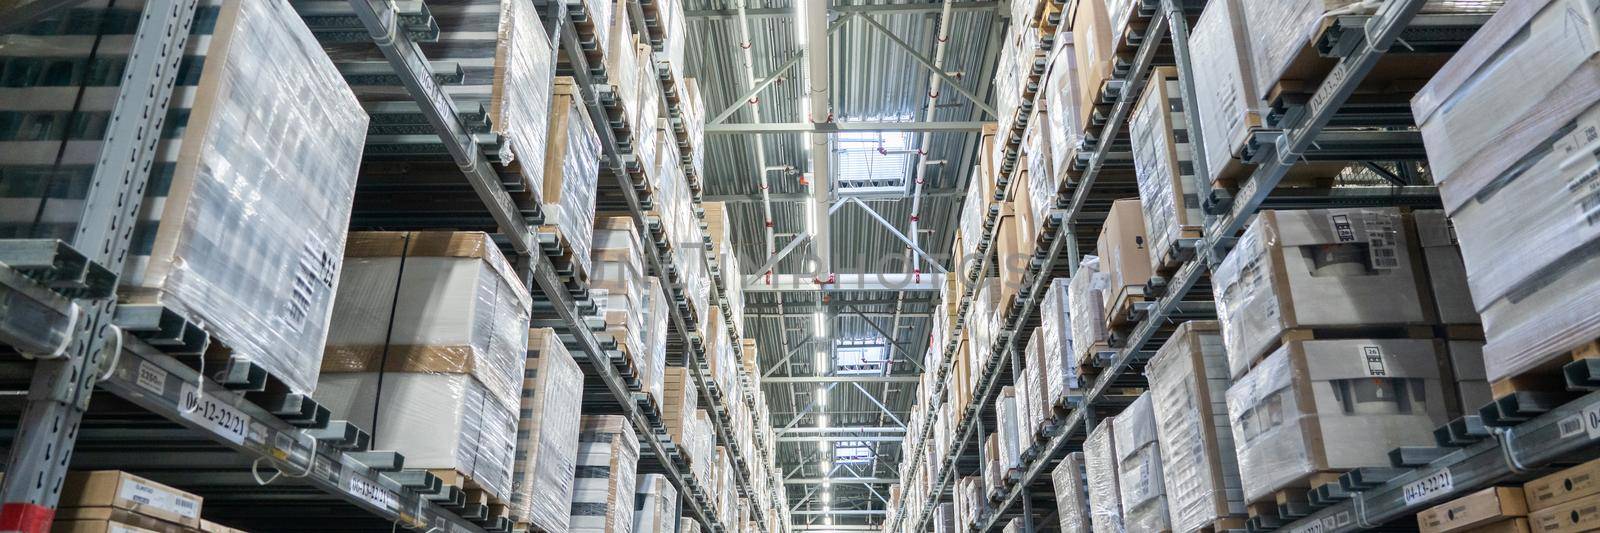 Panorama of Rows of shelves with boxes in modern warehouse by Mariakray